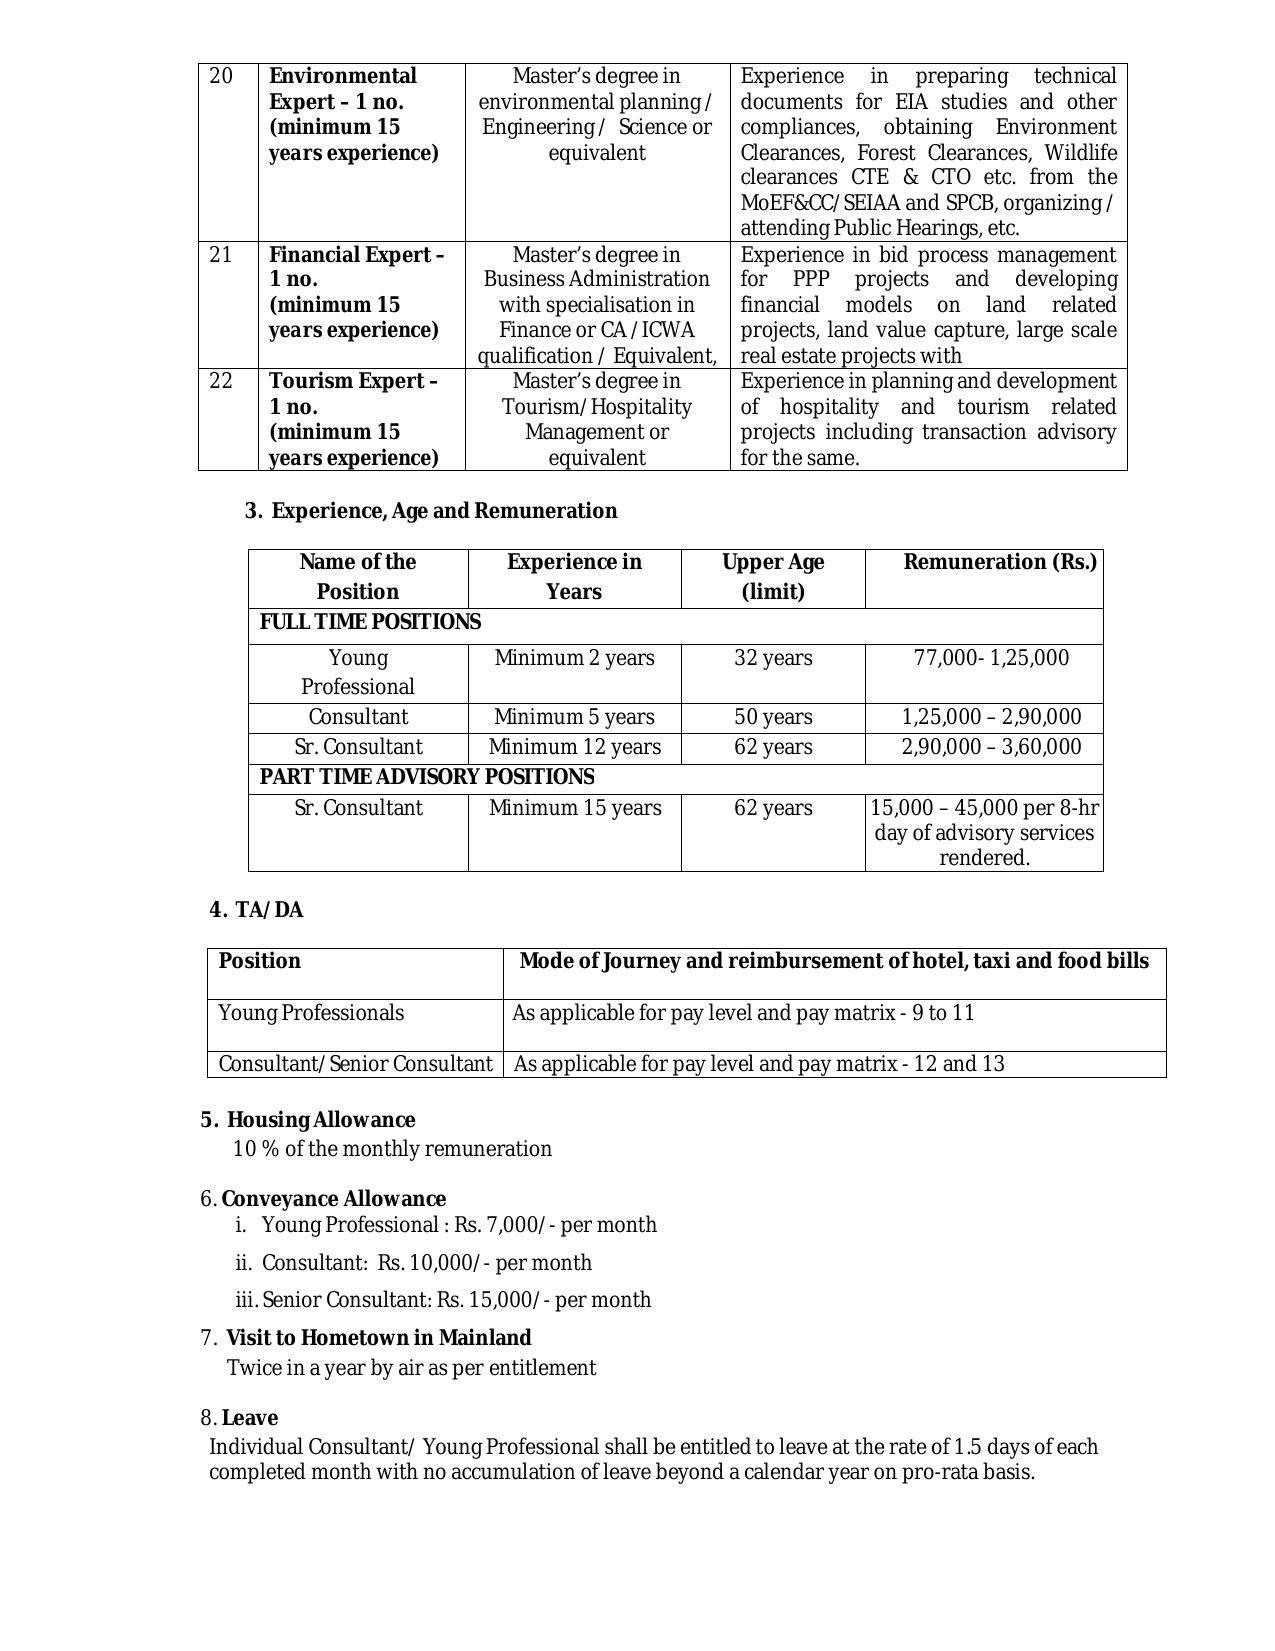 ANIIDCO Invites Application for 18 Environmental Planner, More Vacancies Recruitment 2022 - Page 15